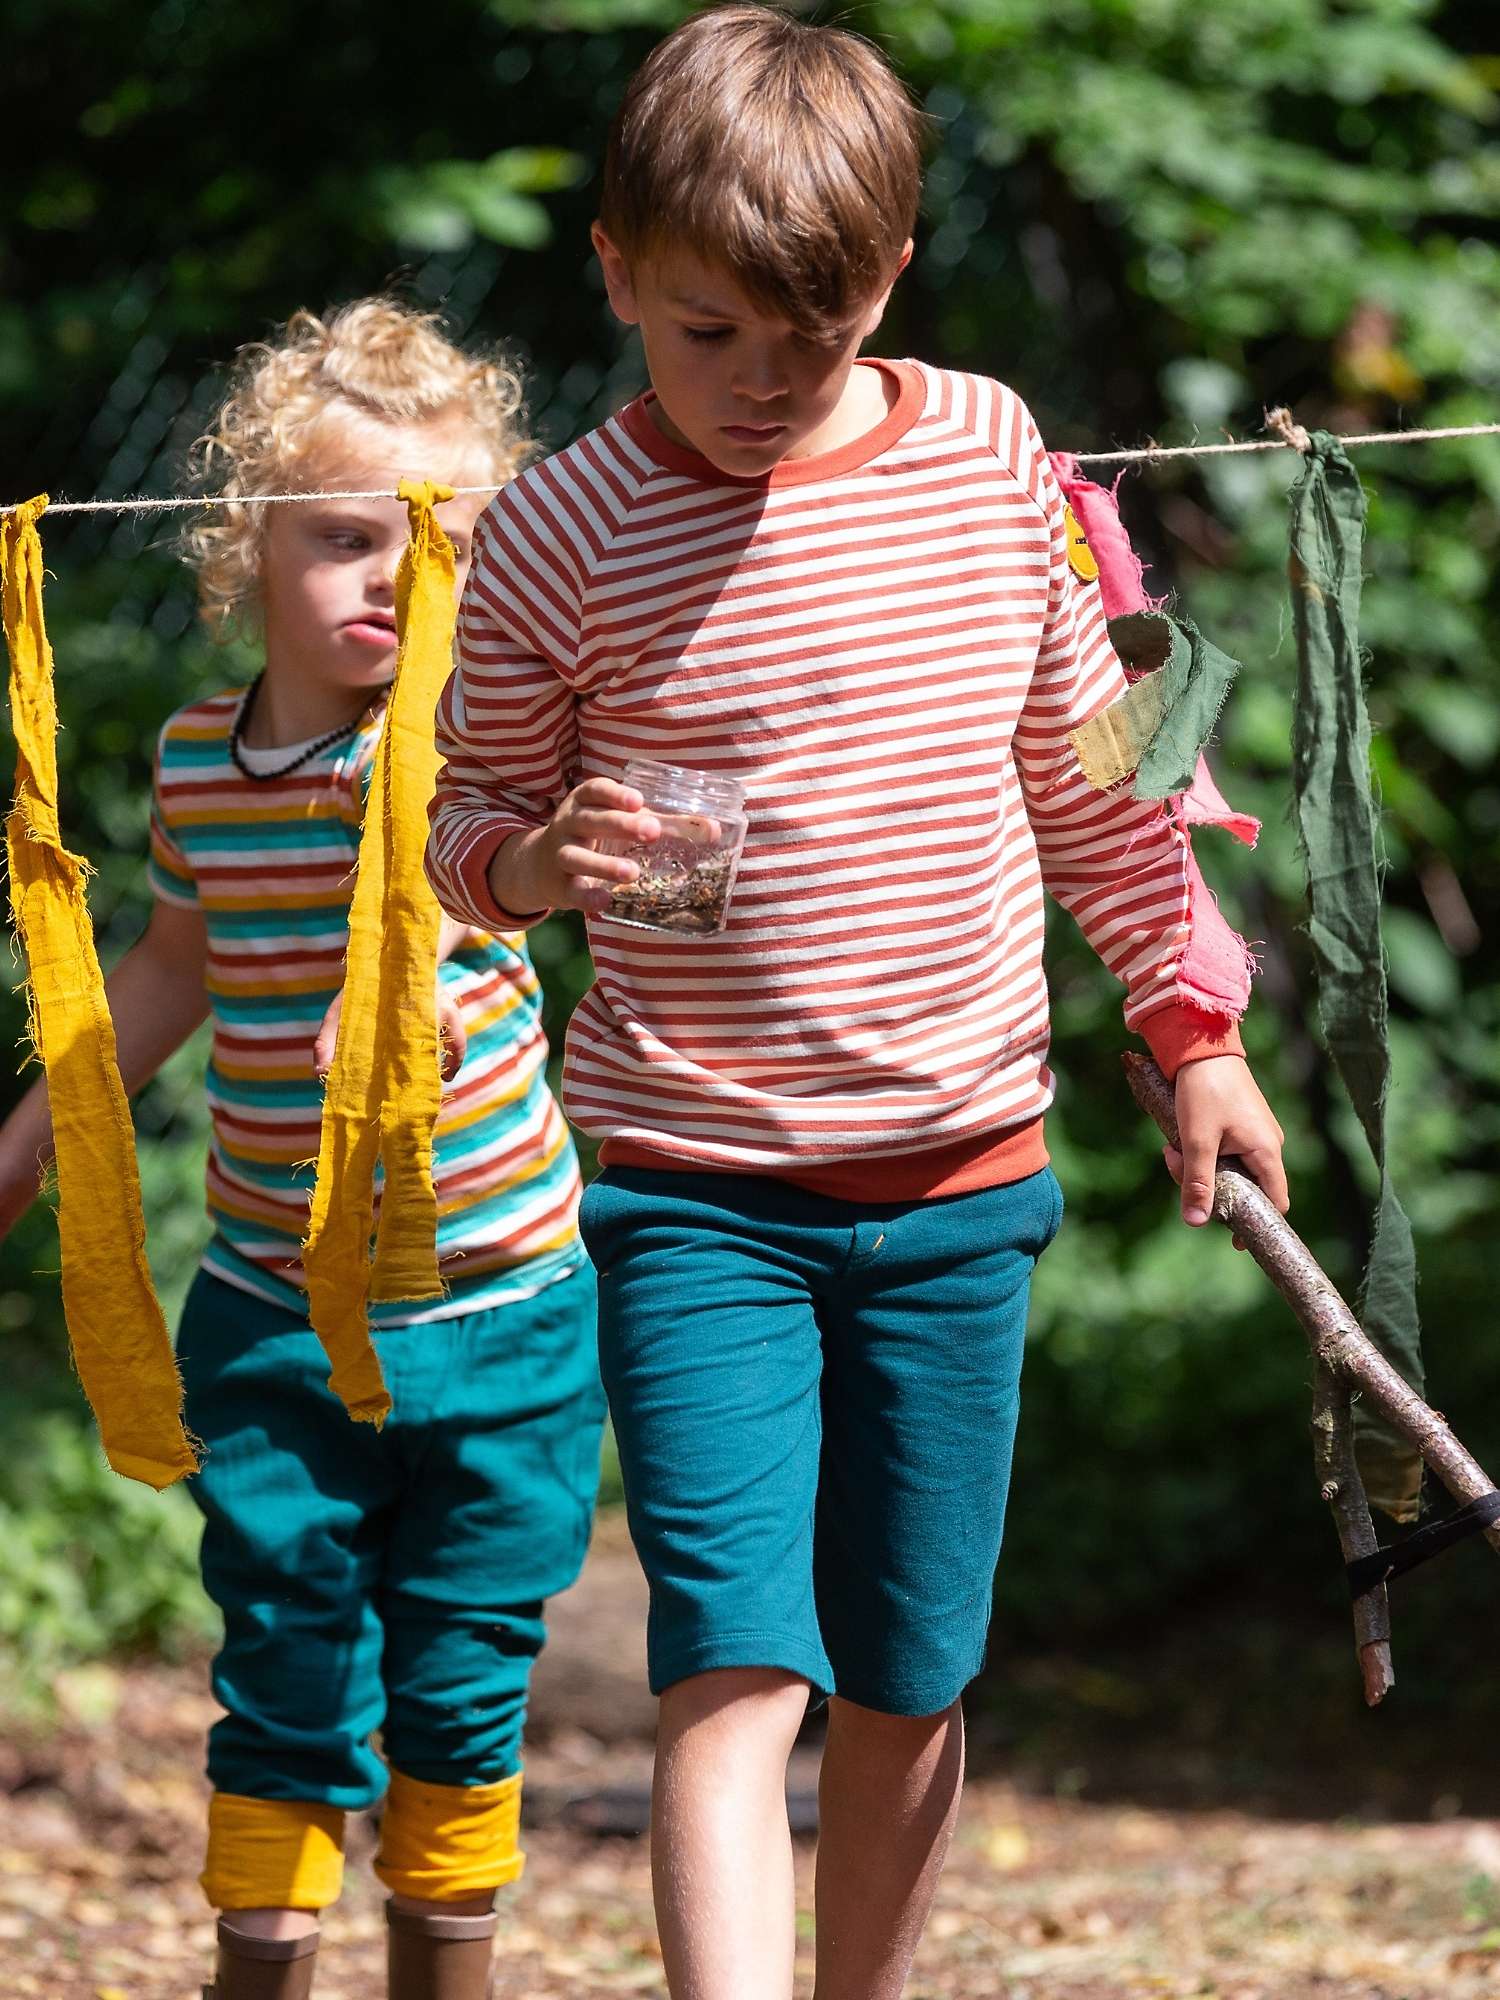 Buy Little Green Radicals Baby Organic Cotton Comfy Jogger Shorts, Blue Marl Online at johnlewis.com